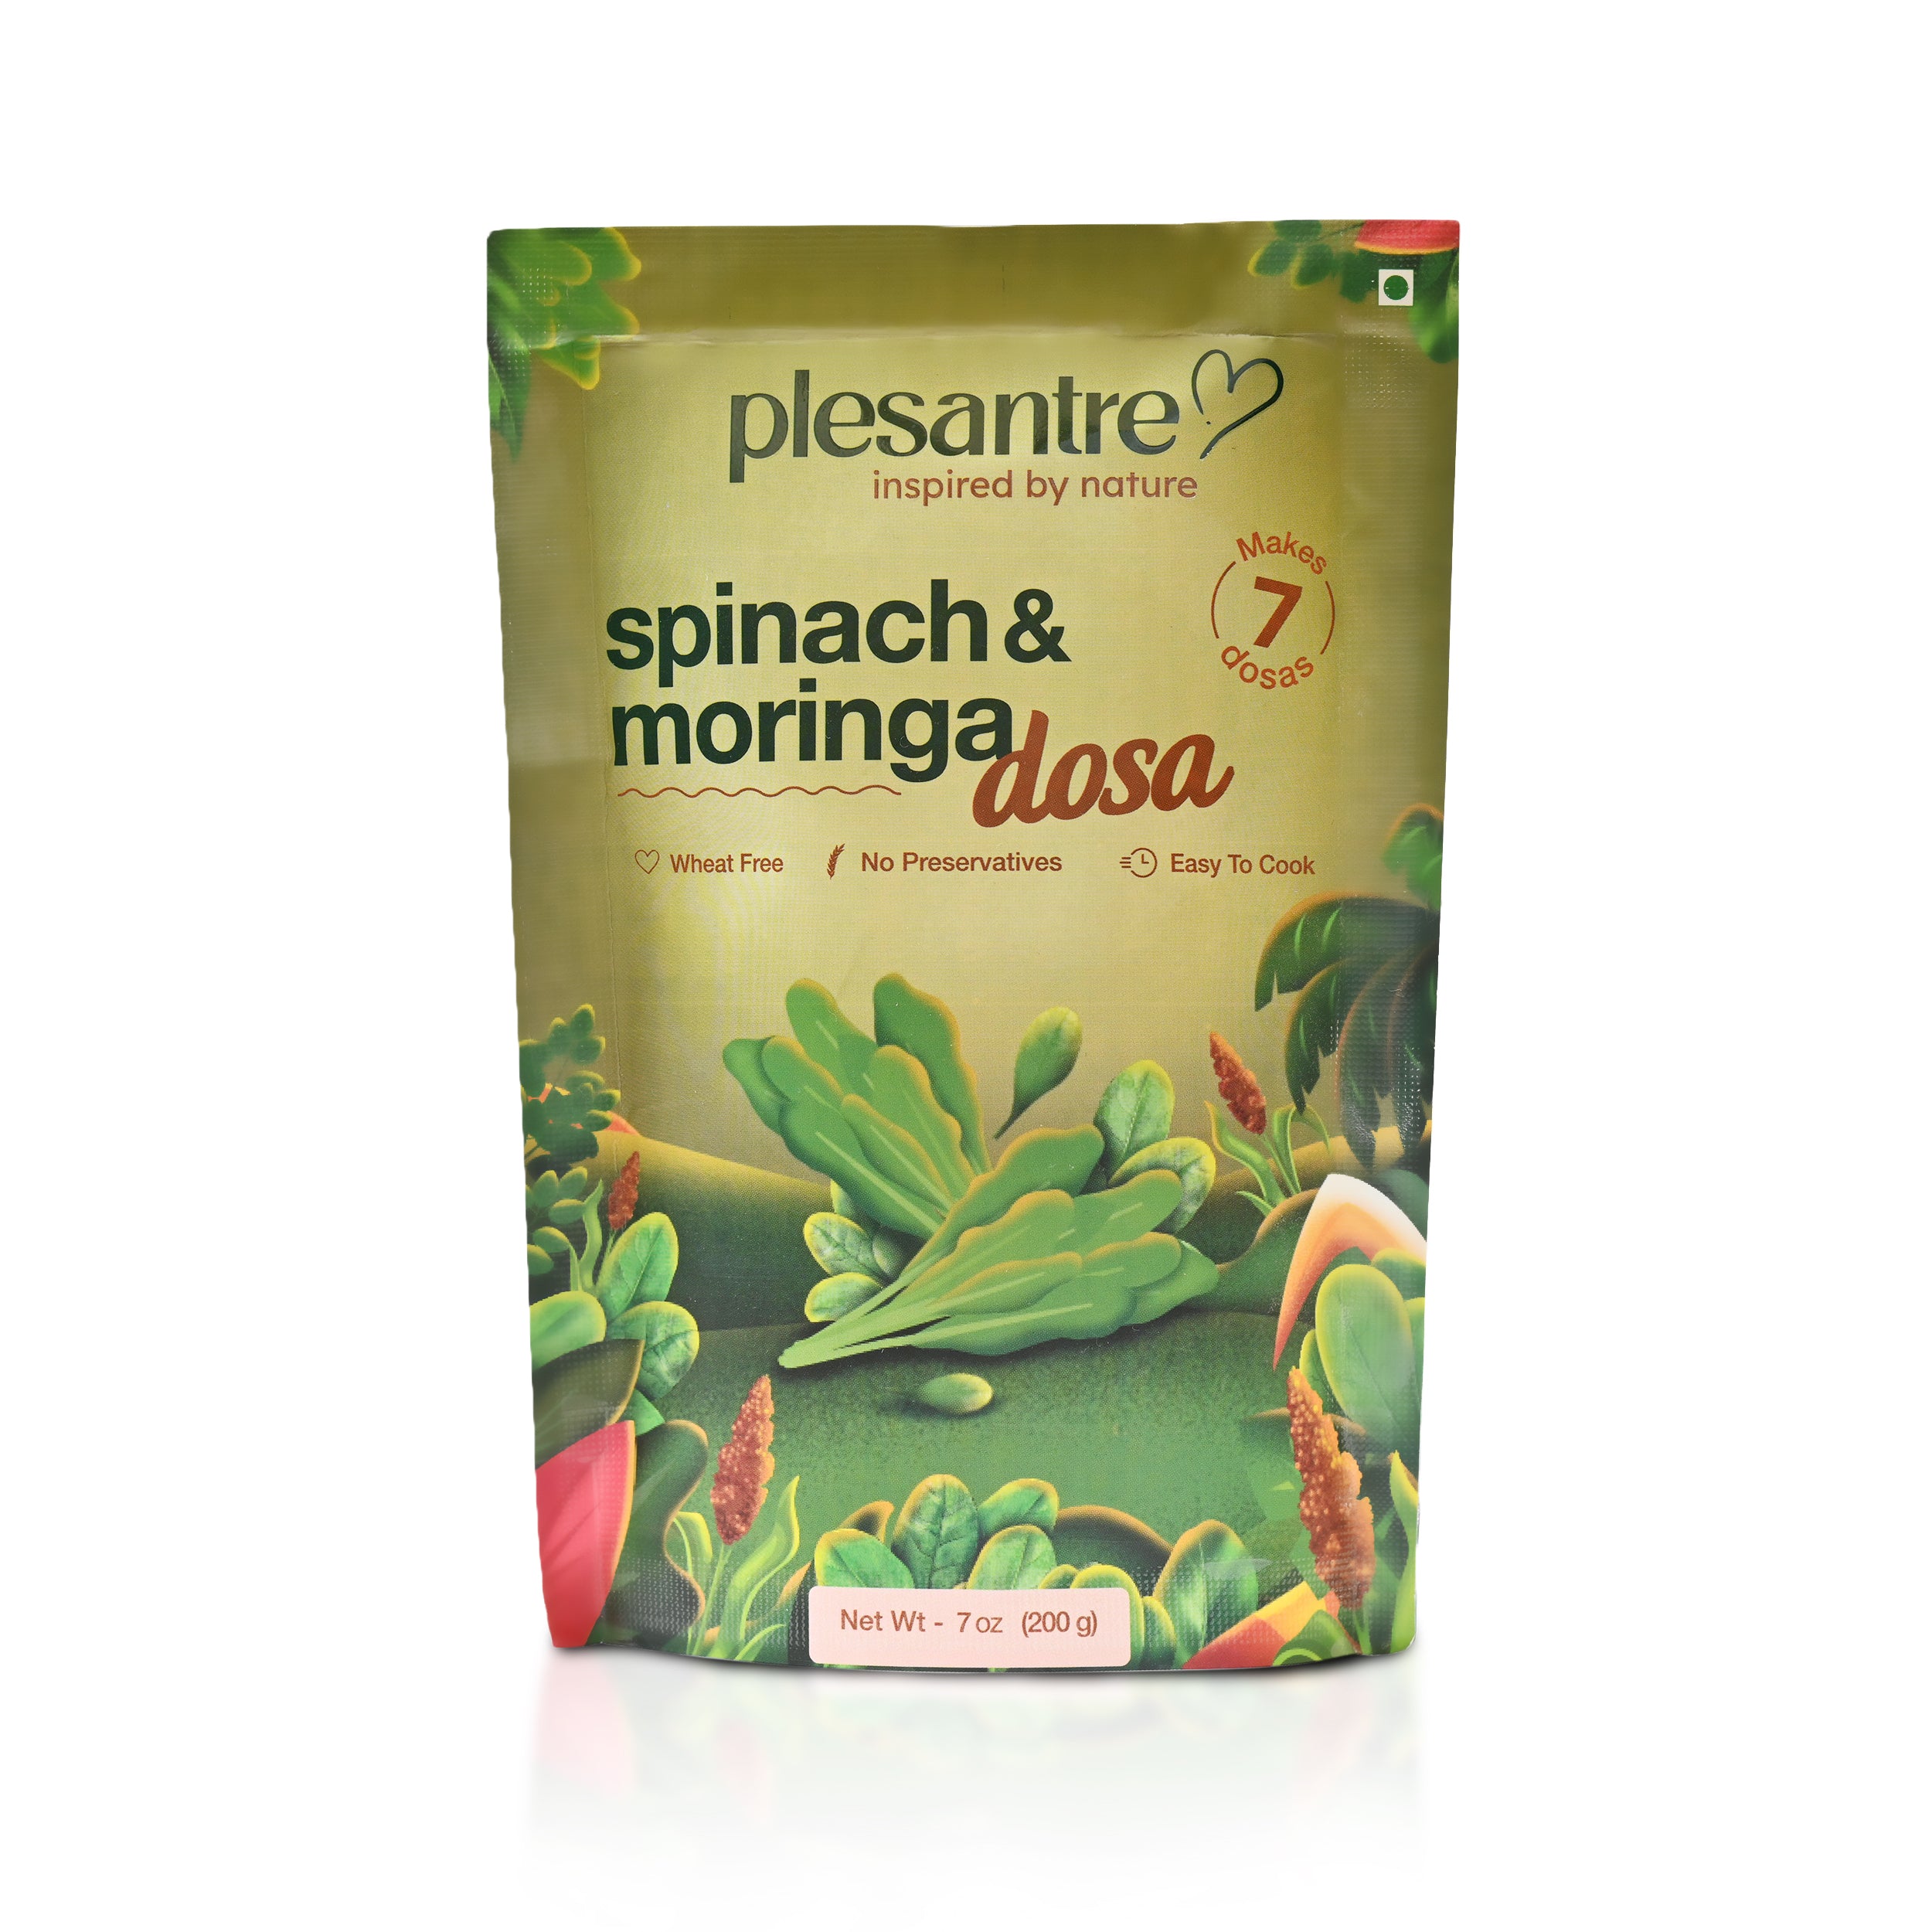 plesantre "Spinach & Moringa Dosa" Healthy Greens Superfood Dosa Batter Mix - Instant Ready to Cook Breakfast Premix - Wheat Free, Vegan, No Preservatives - 200g x Pack of 2, Makes 14 Dosas